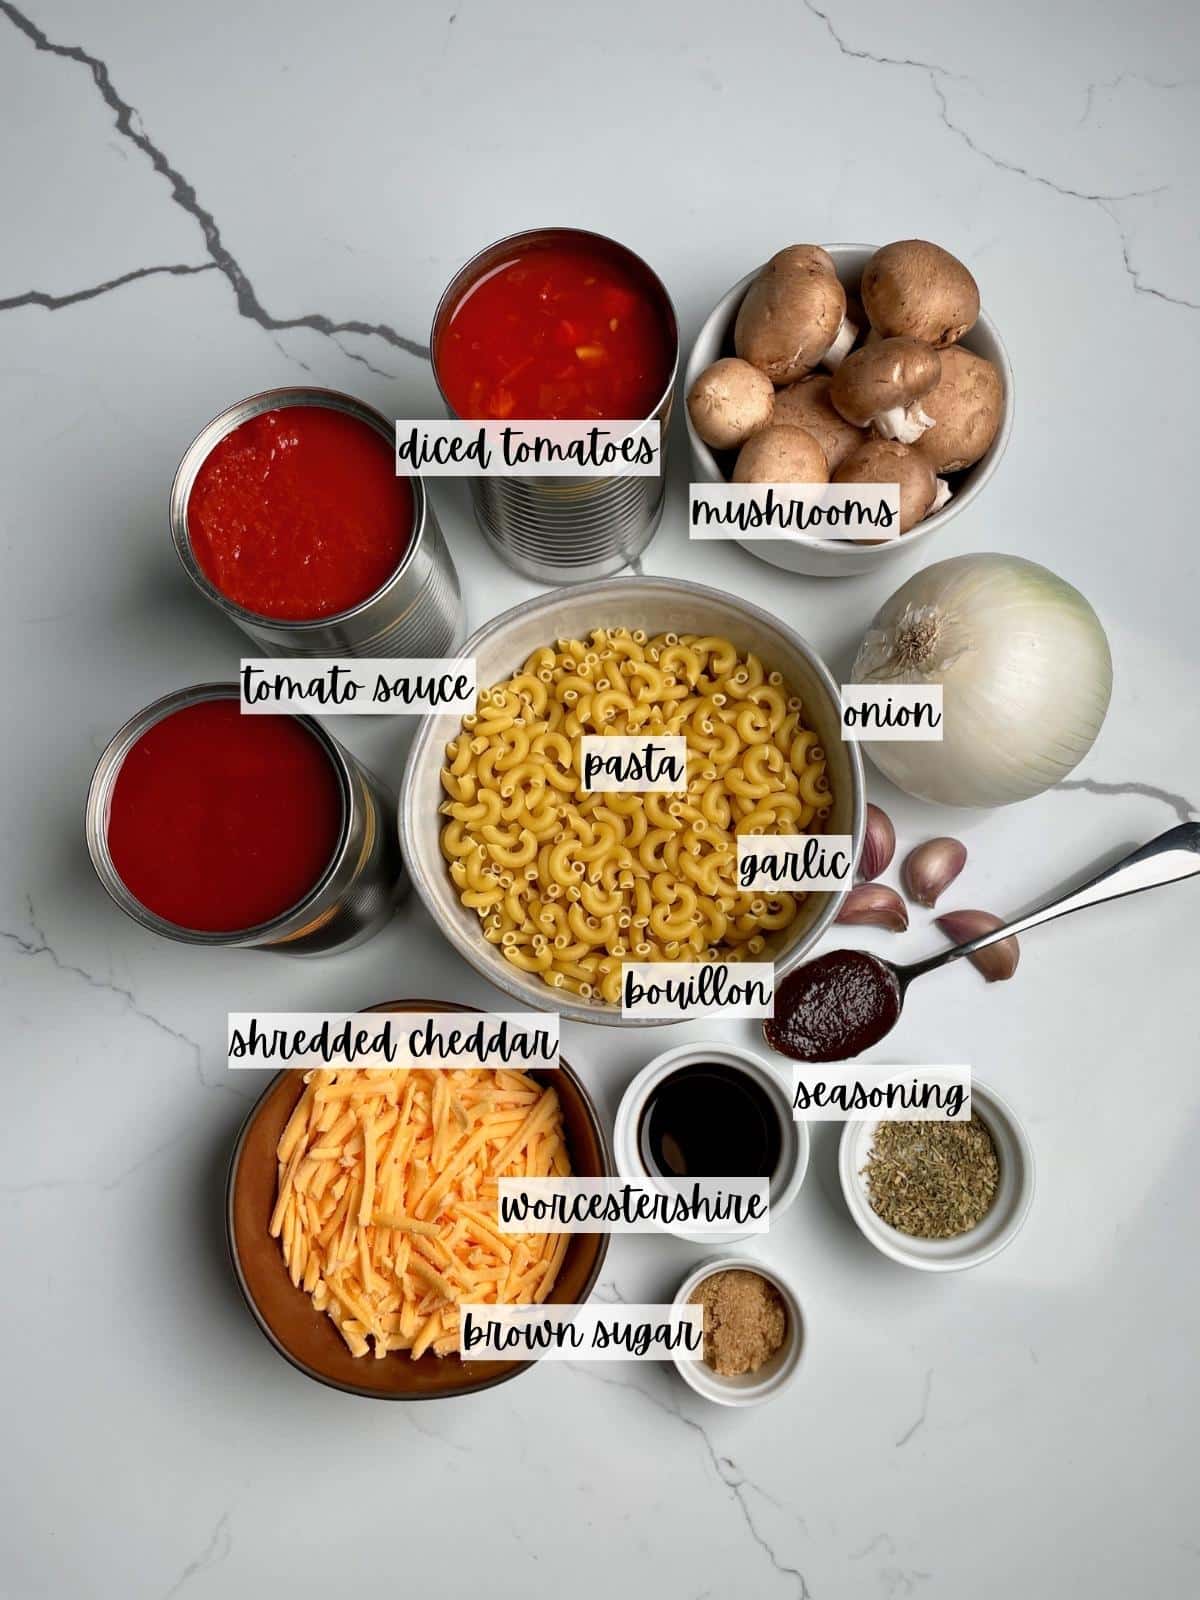 Labeled ingredients for american goulash.